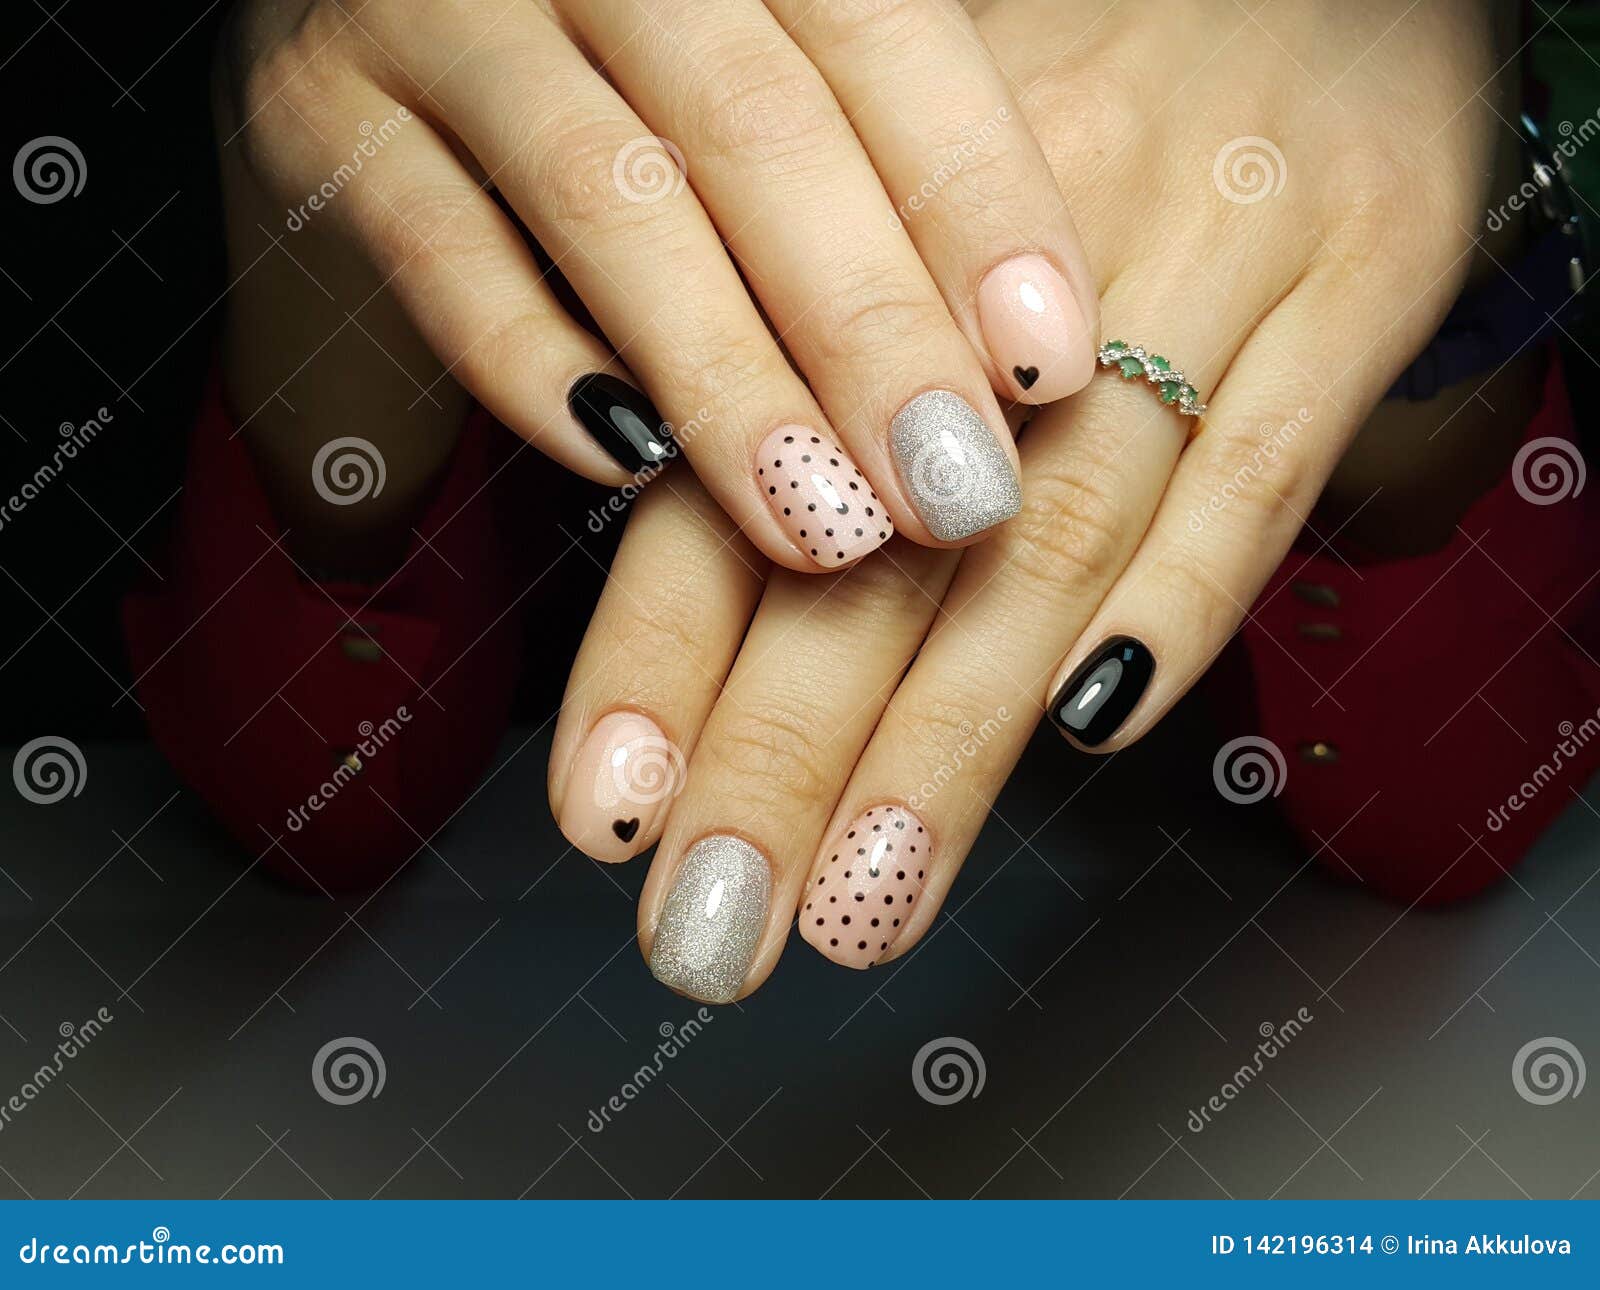 nail design pictures girly